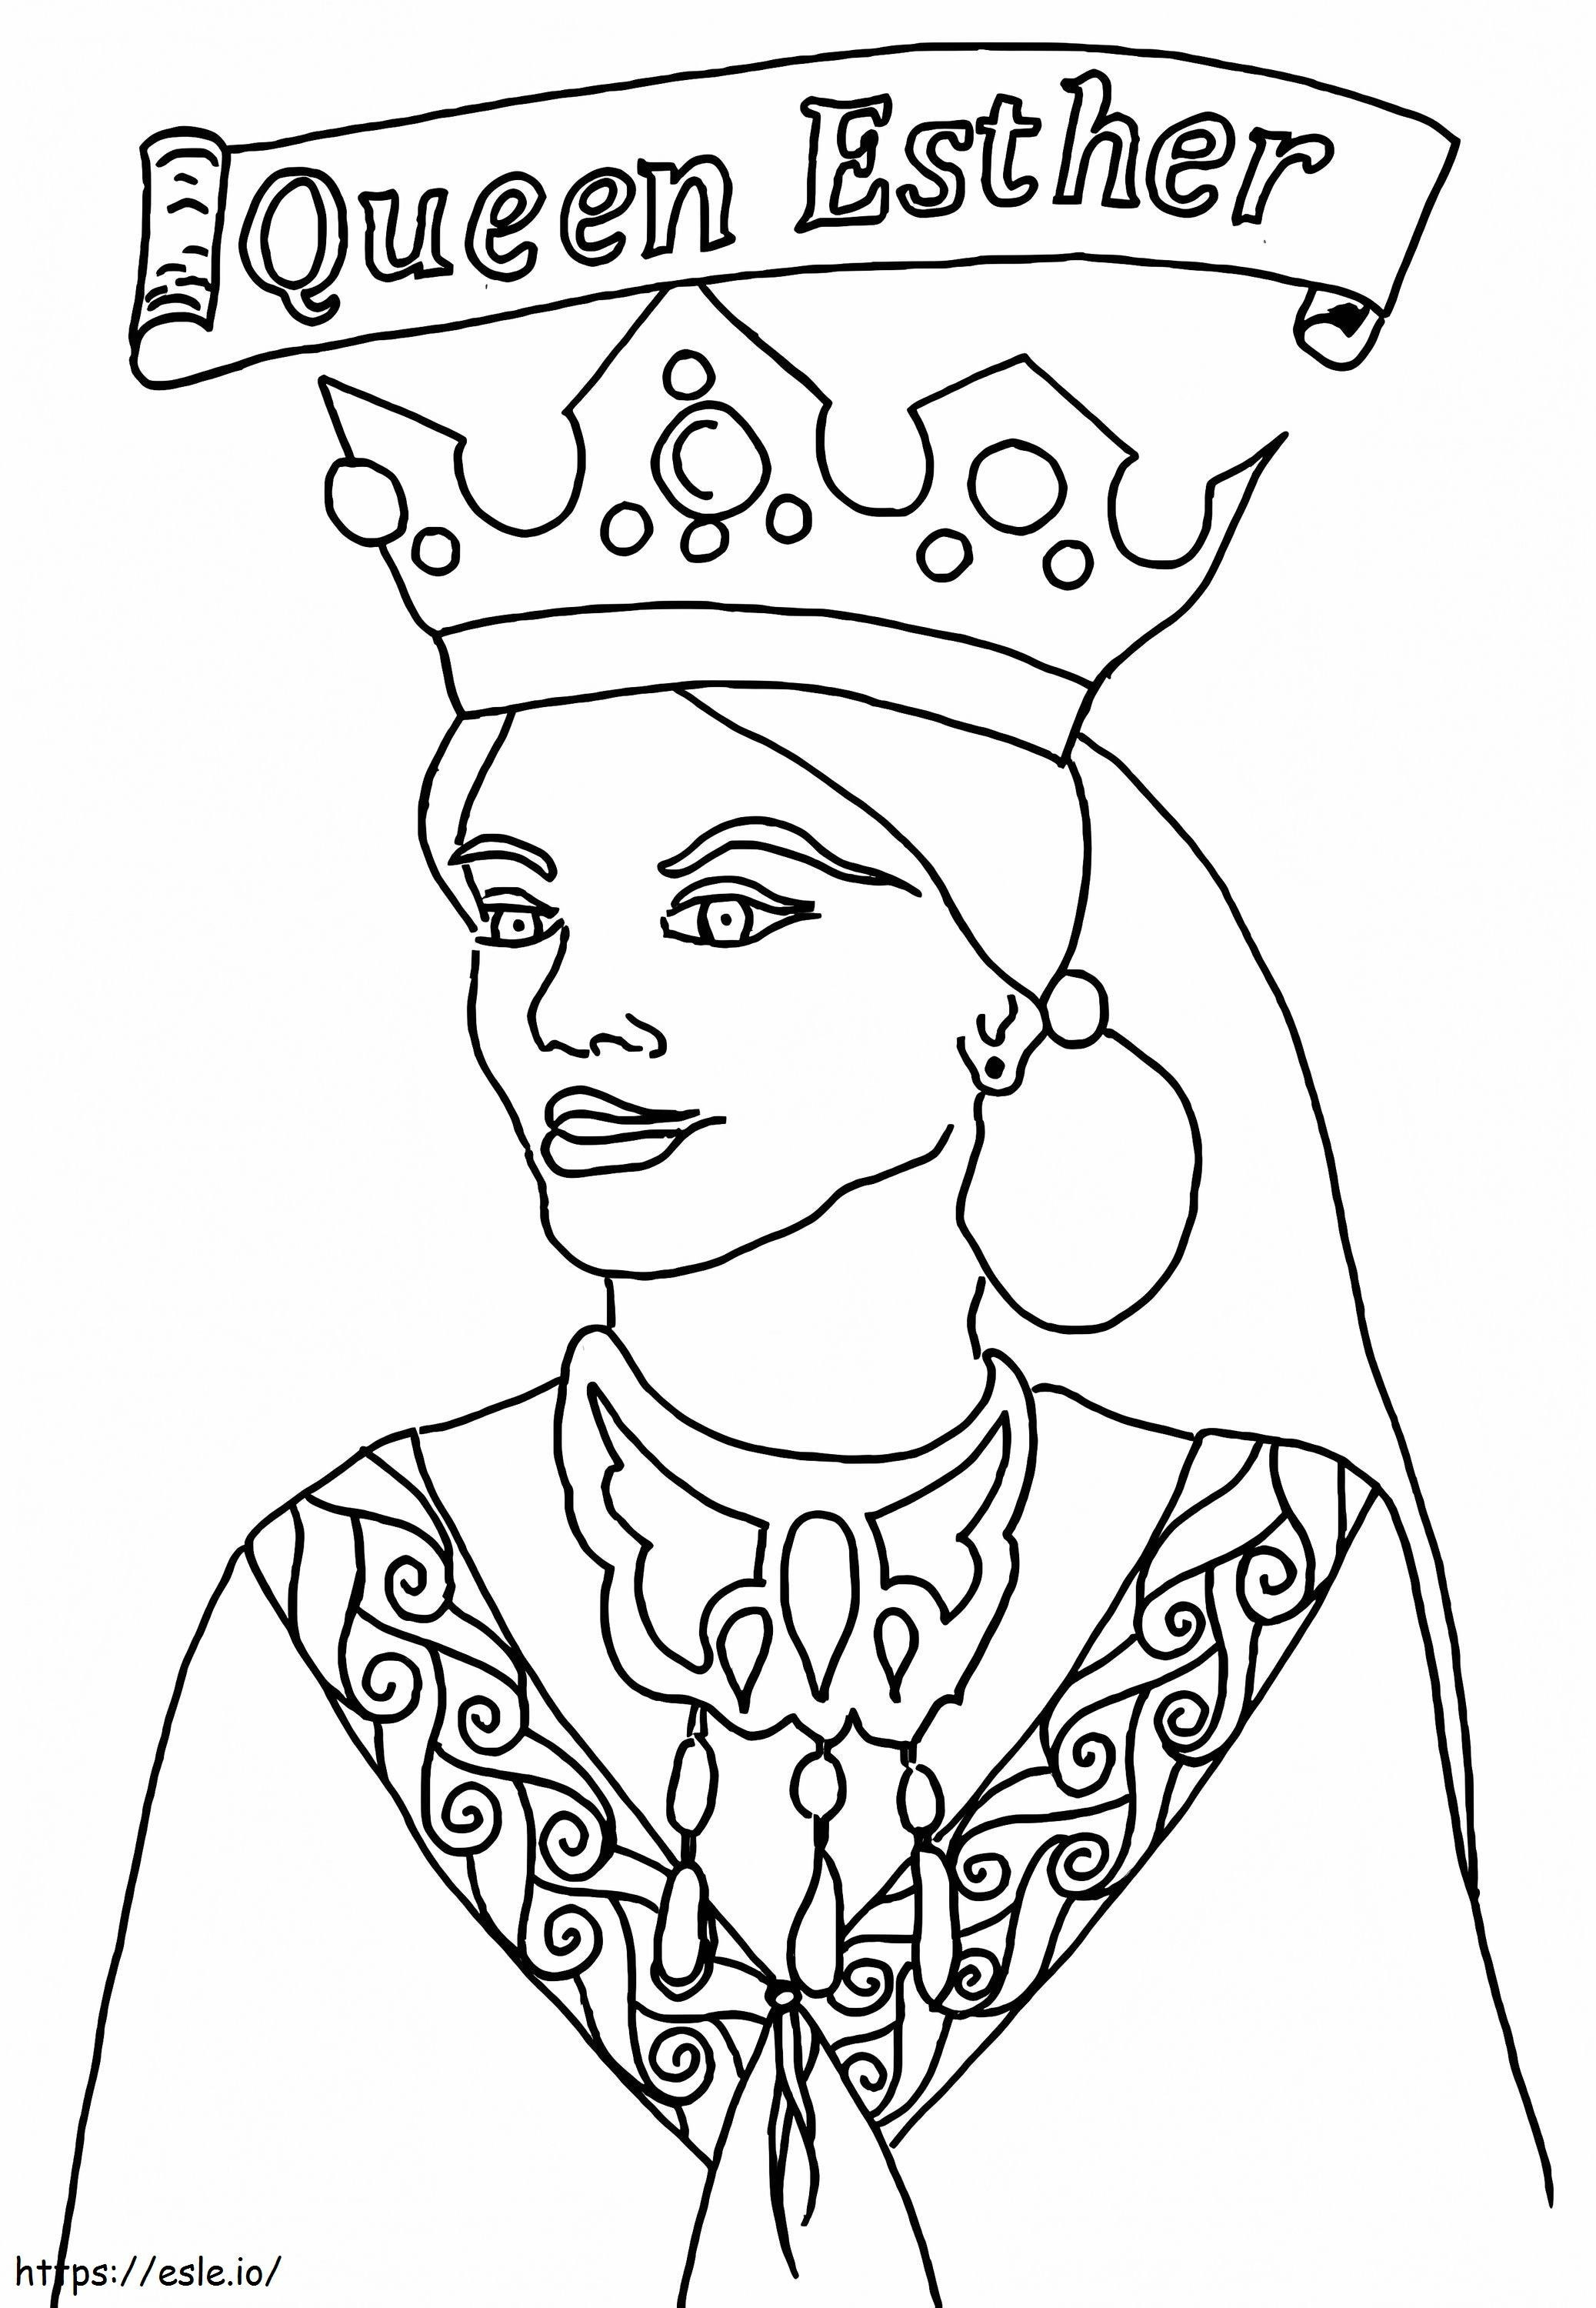 Free Queen Esther coloring page